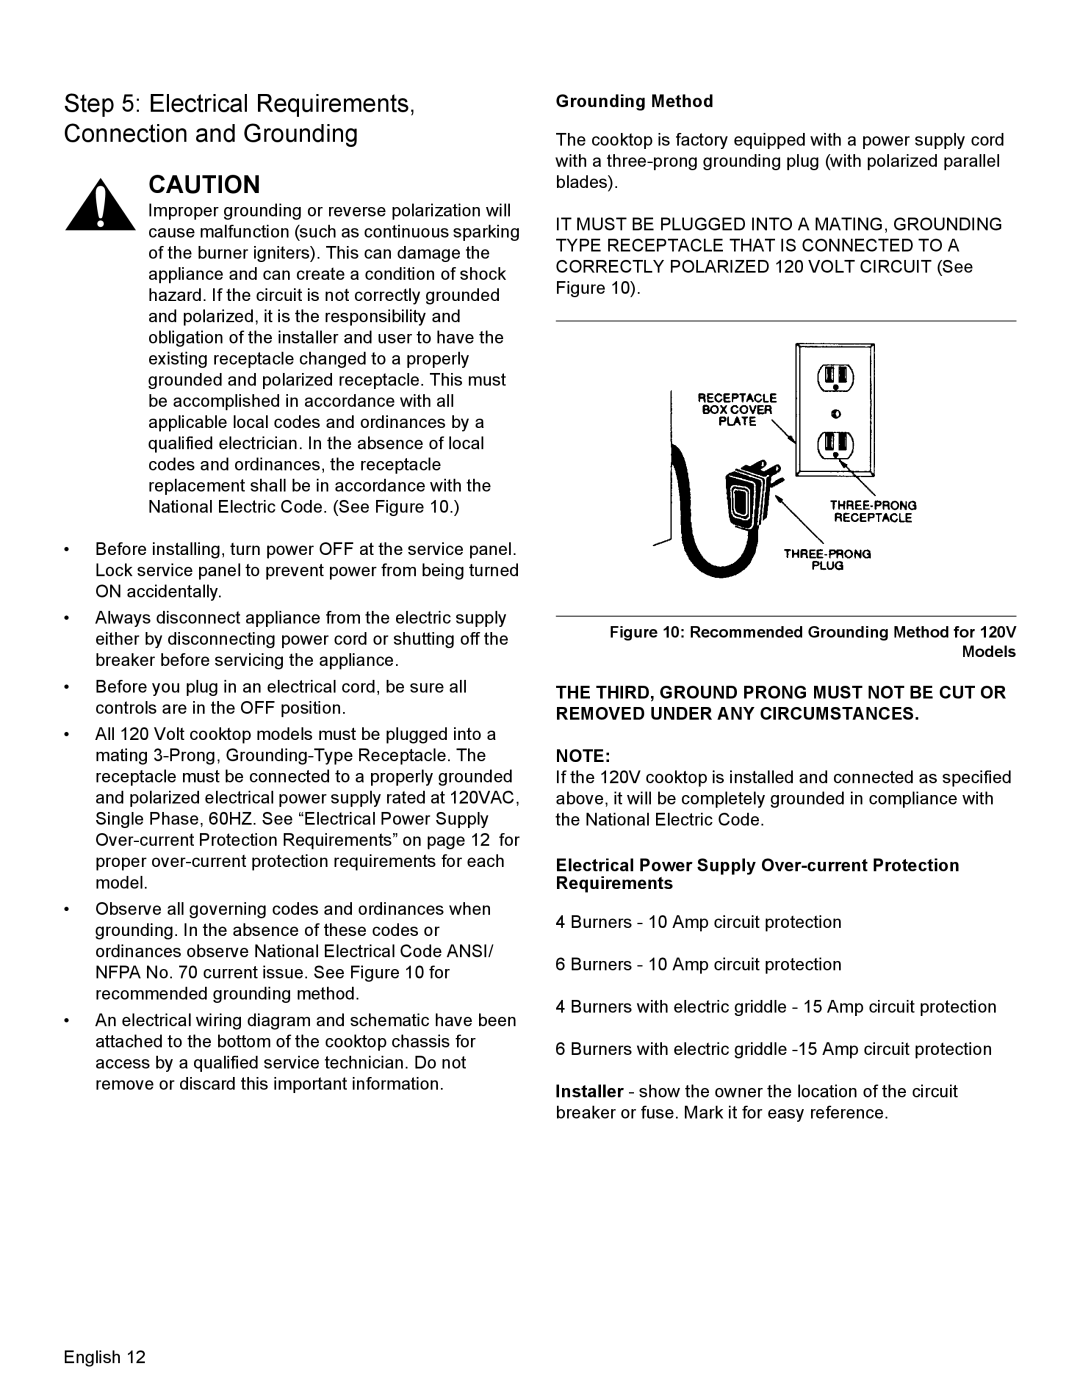 Thermador PCG30, PCG36, PCG48 installation manual Electrical Requirements, Connection and Grounding, Grounding Method 